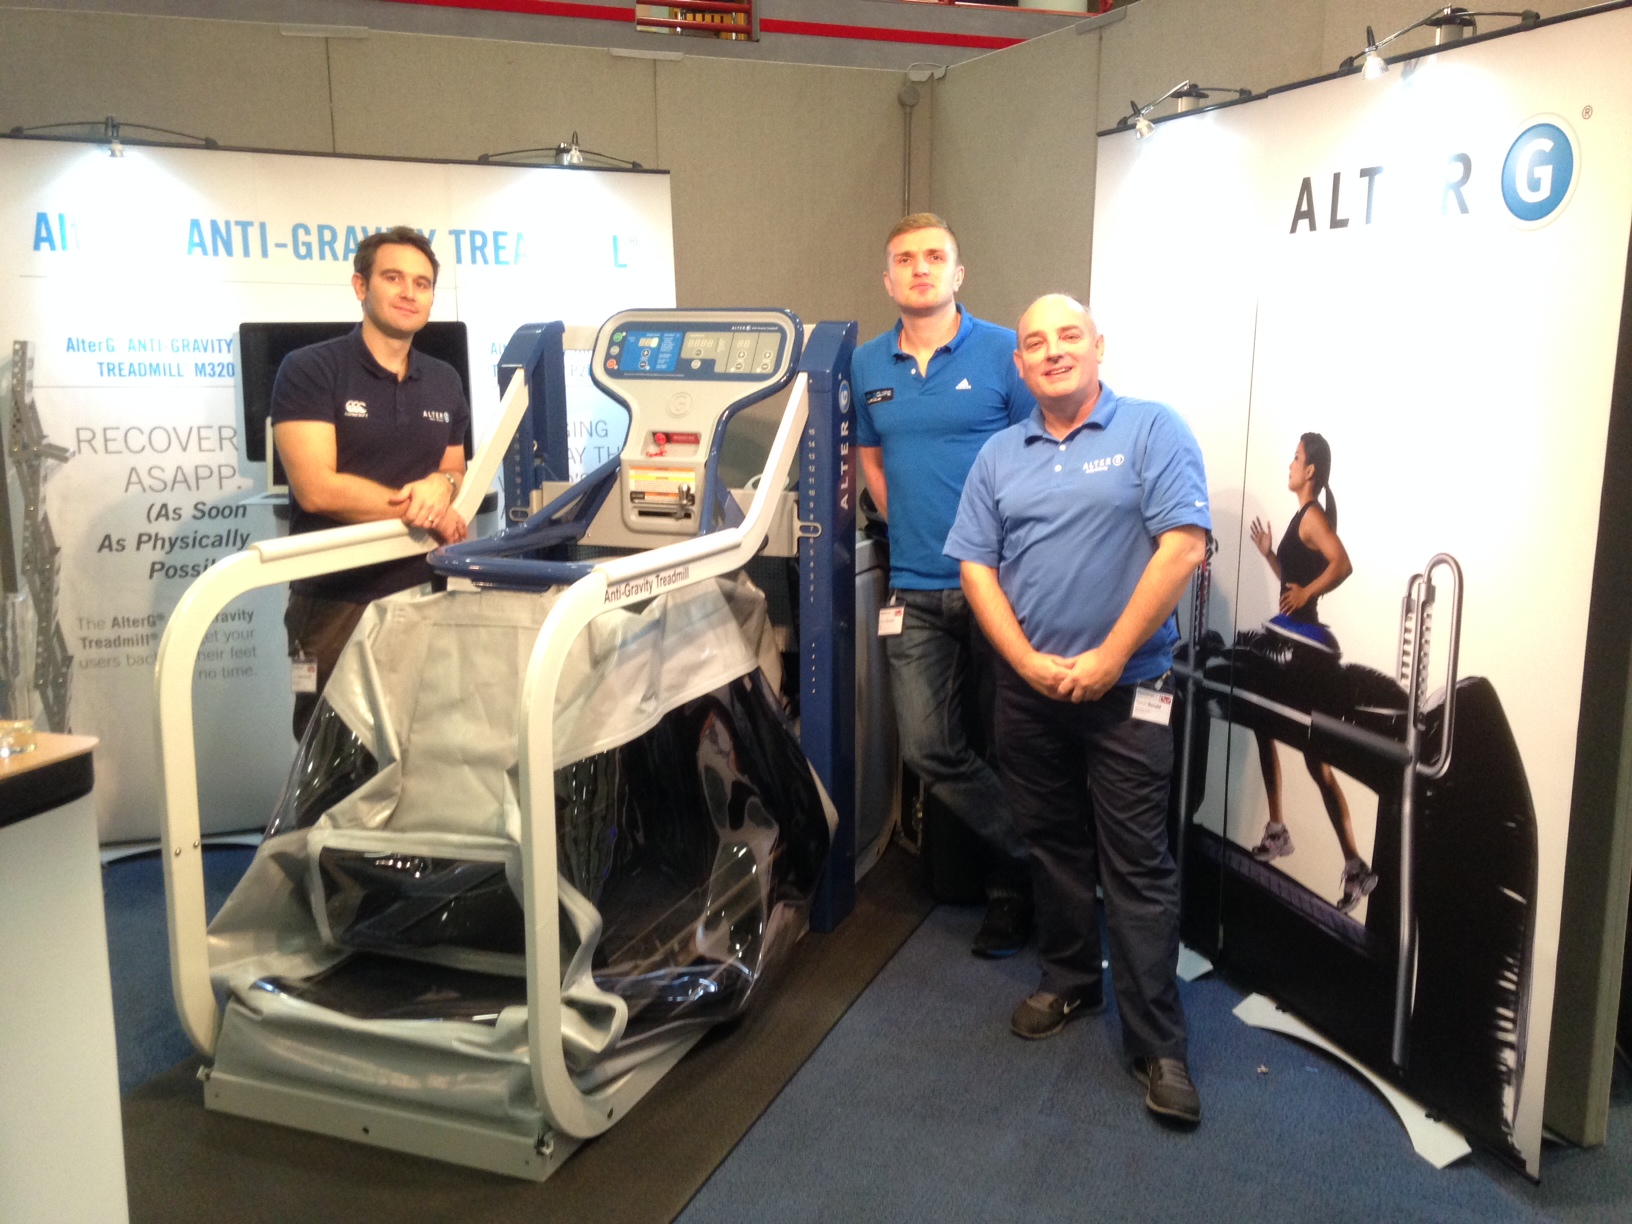 The guys from AlterG